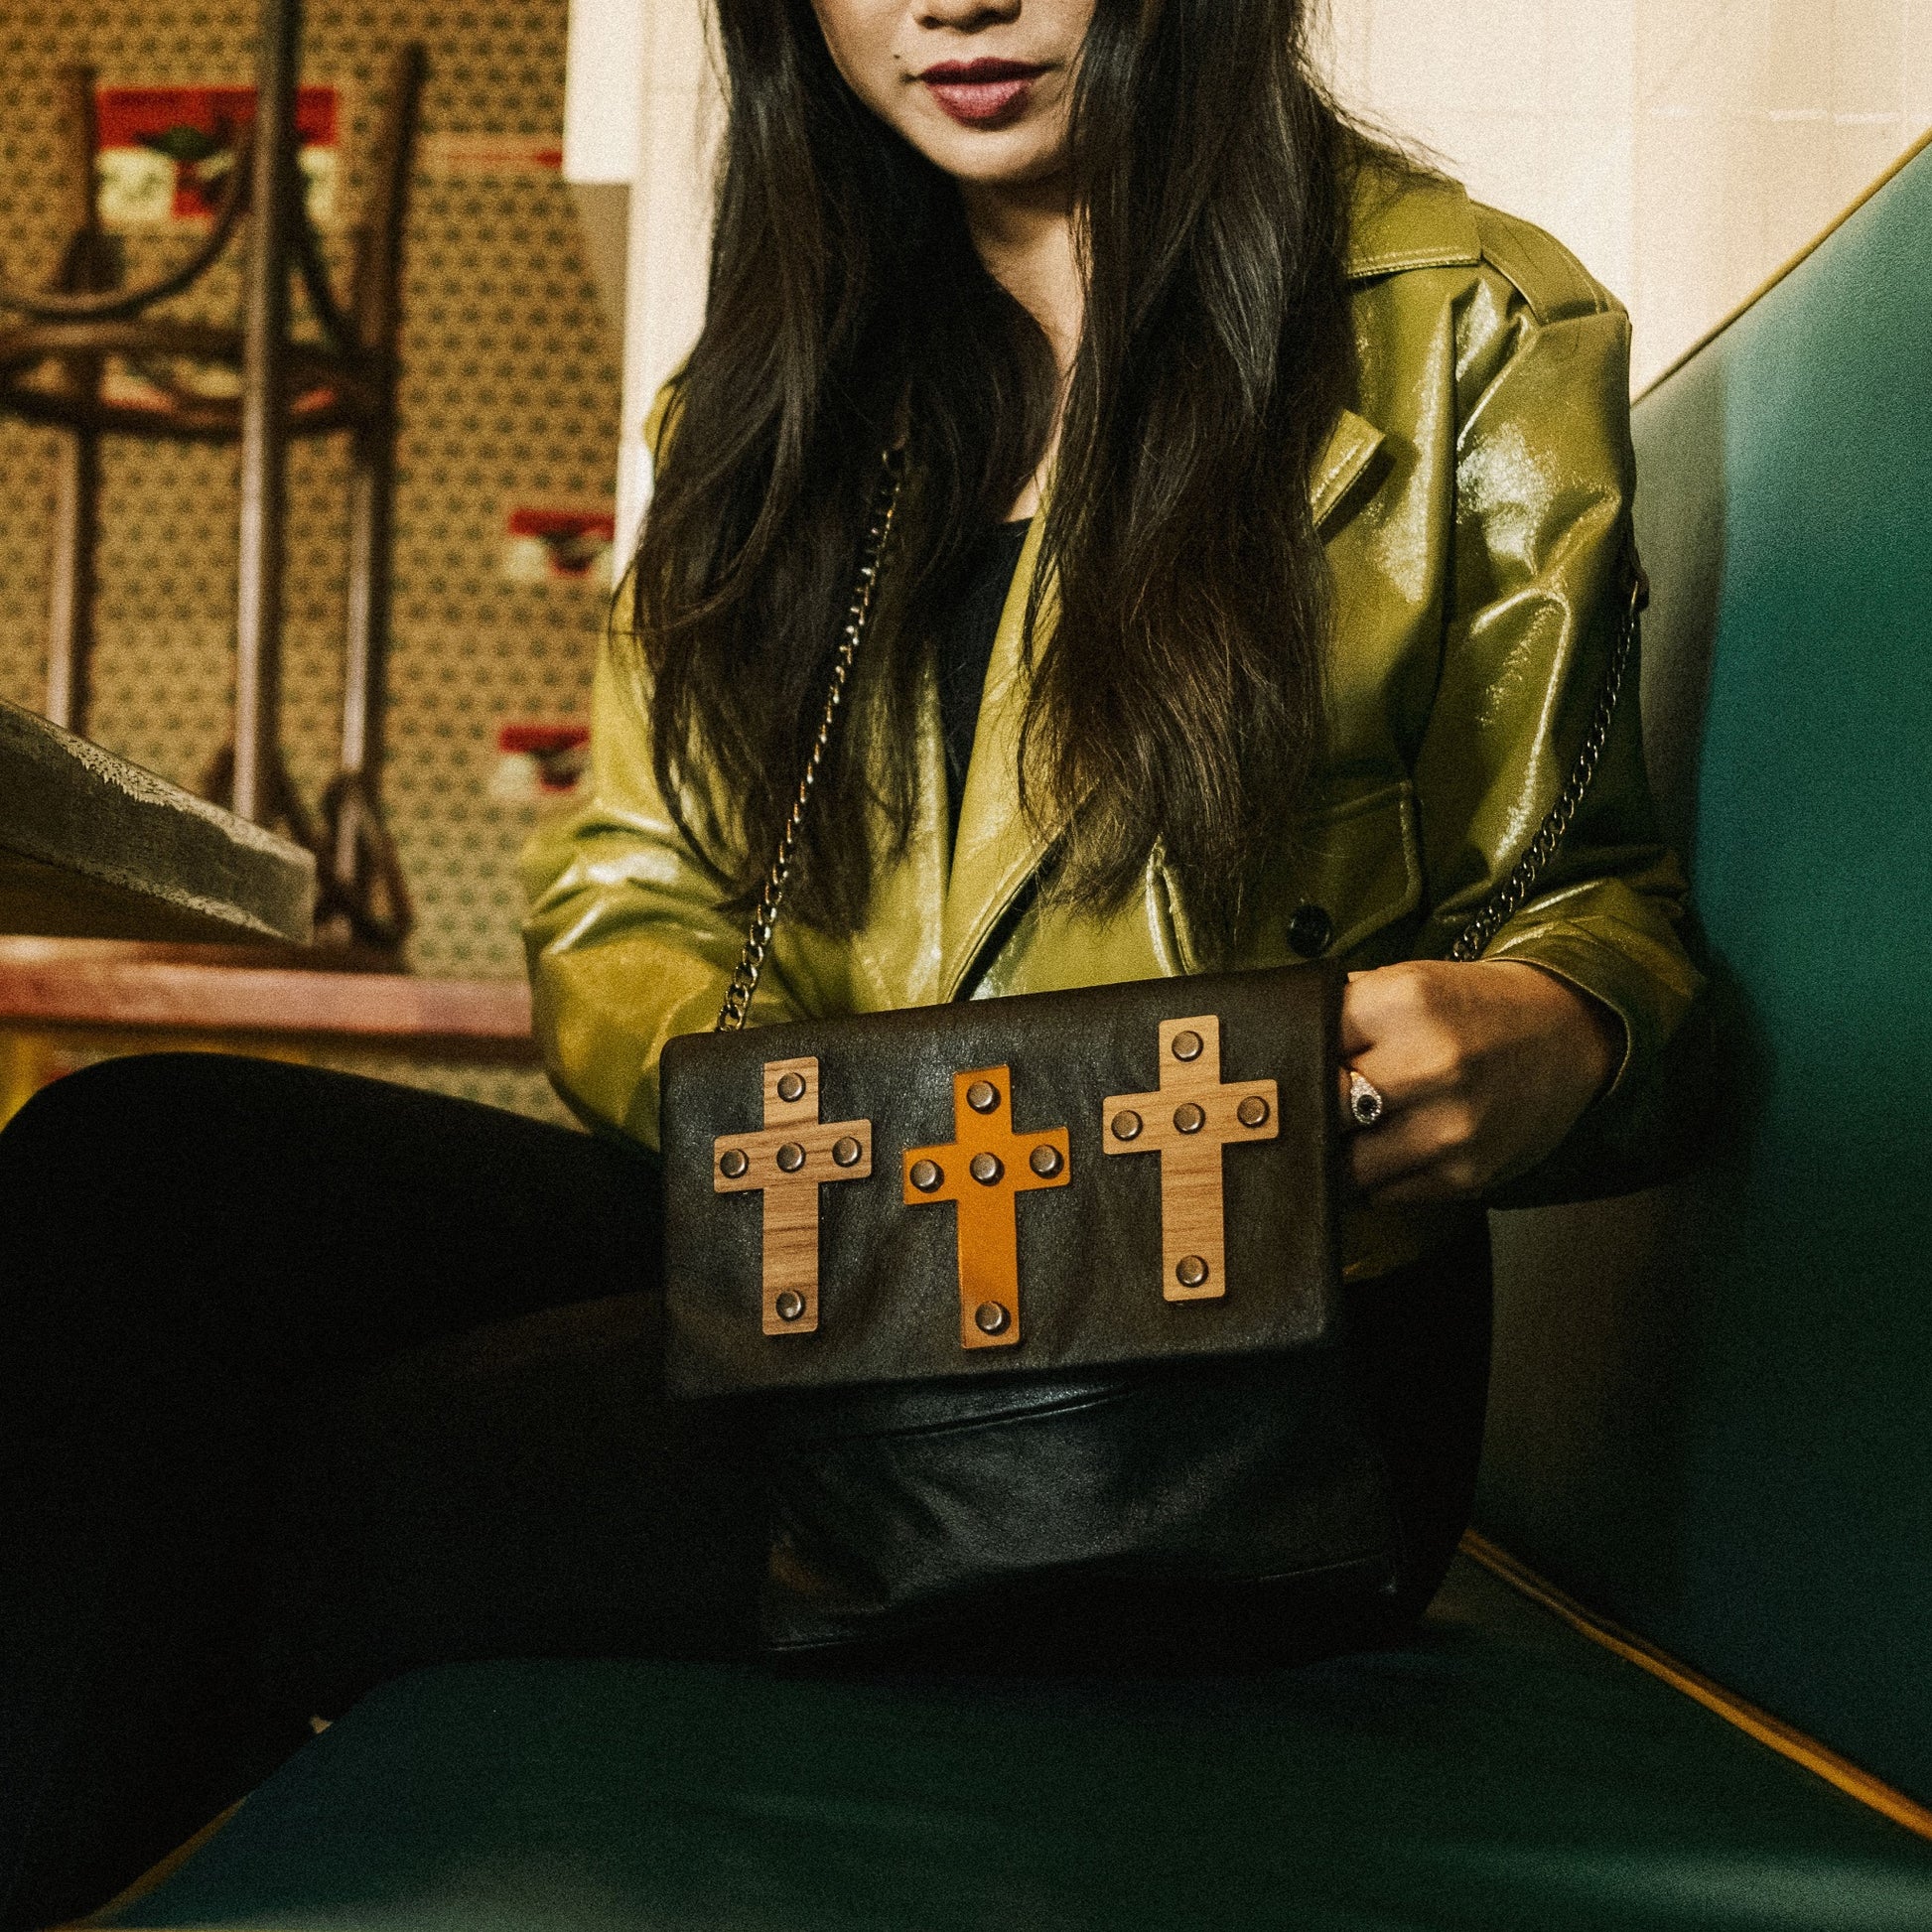 METANoIA The Cross Chocolate recycled leather small handbag with cross shaped bamboo, walnut and metallic acrylic forms. Model featured with cross bag on green vinyl seating.